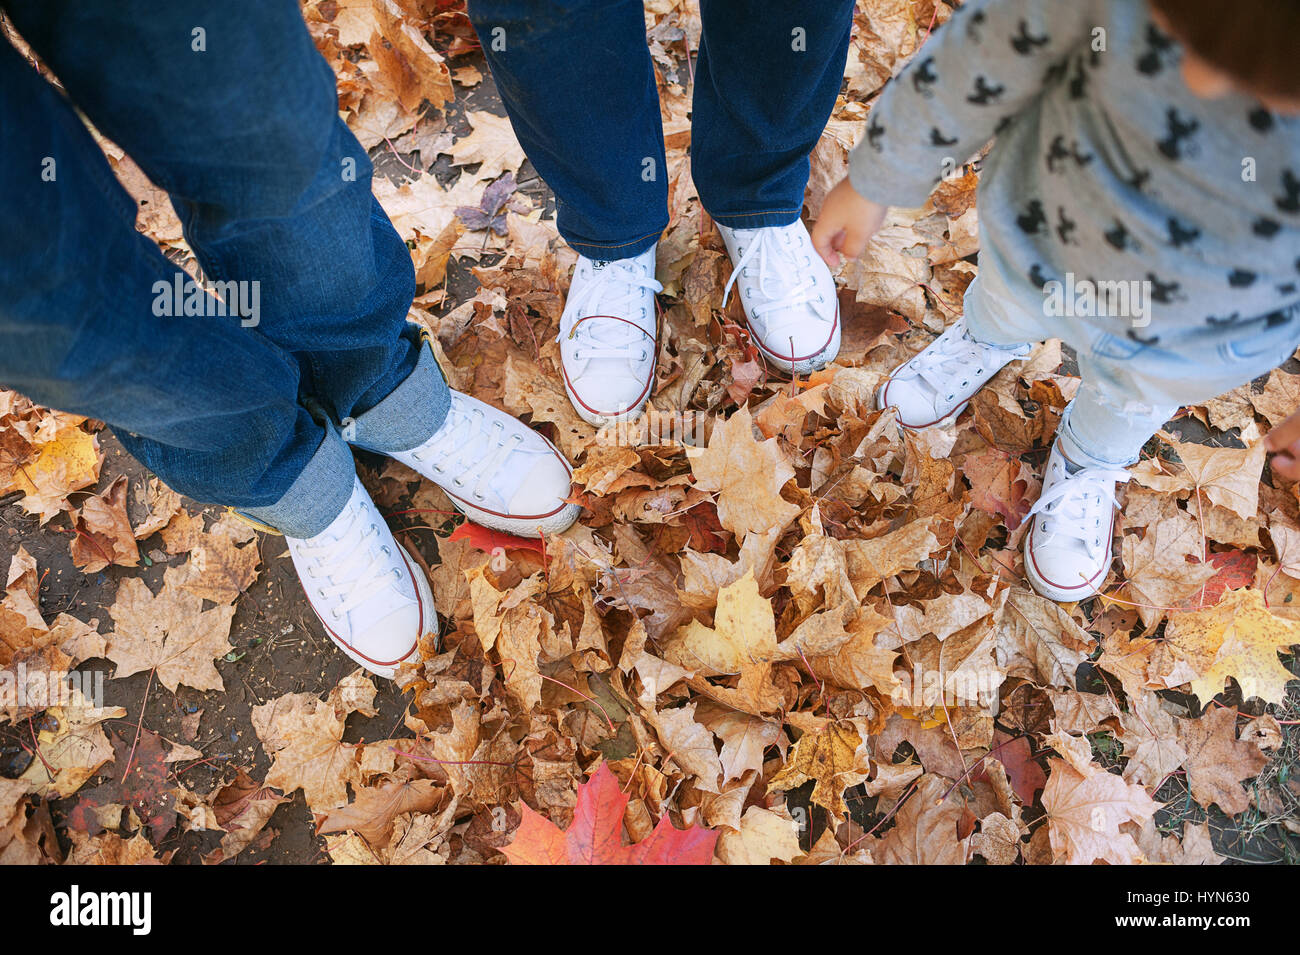 Couple of man and woman with baby Feet in love Romantic open with autumn leaves on background Lifestyle Concept of fashion Stock Photo